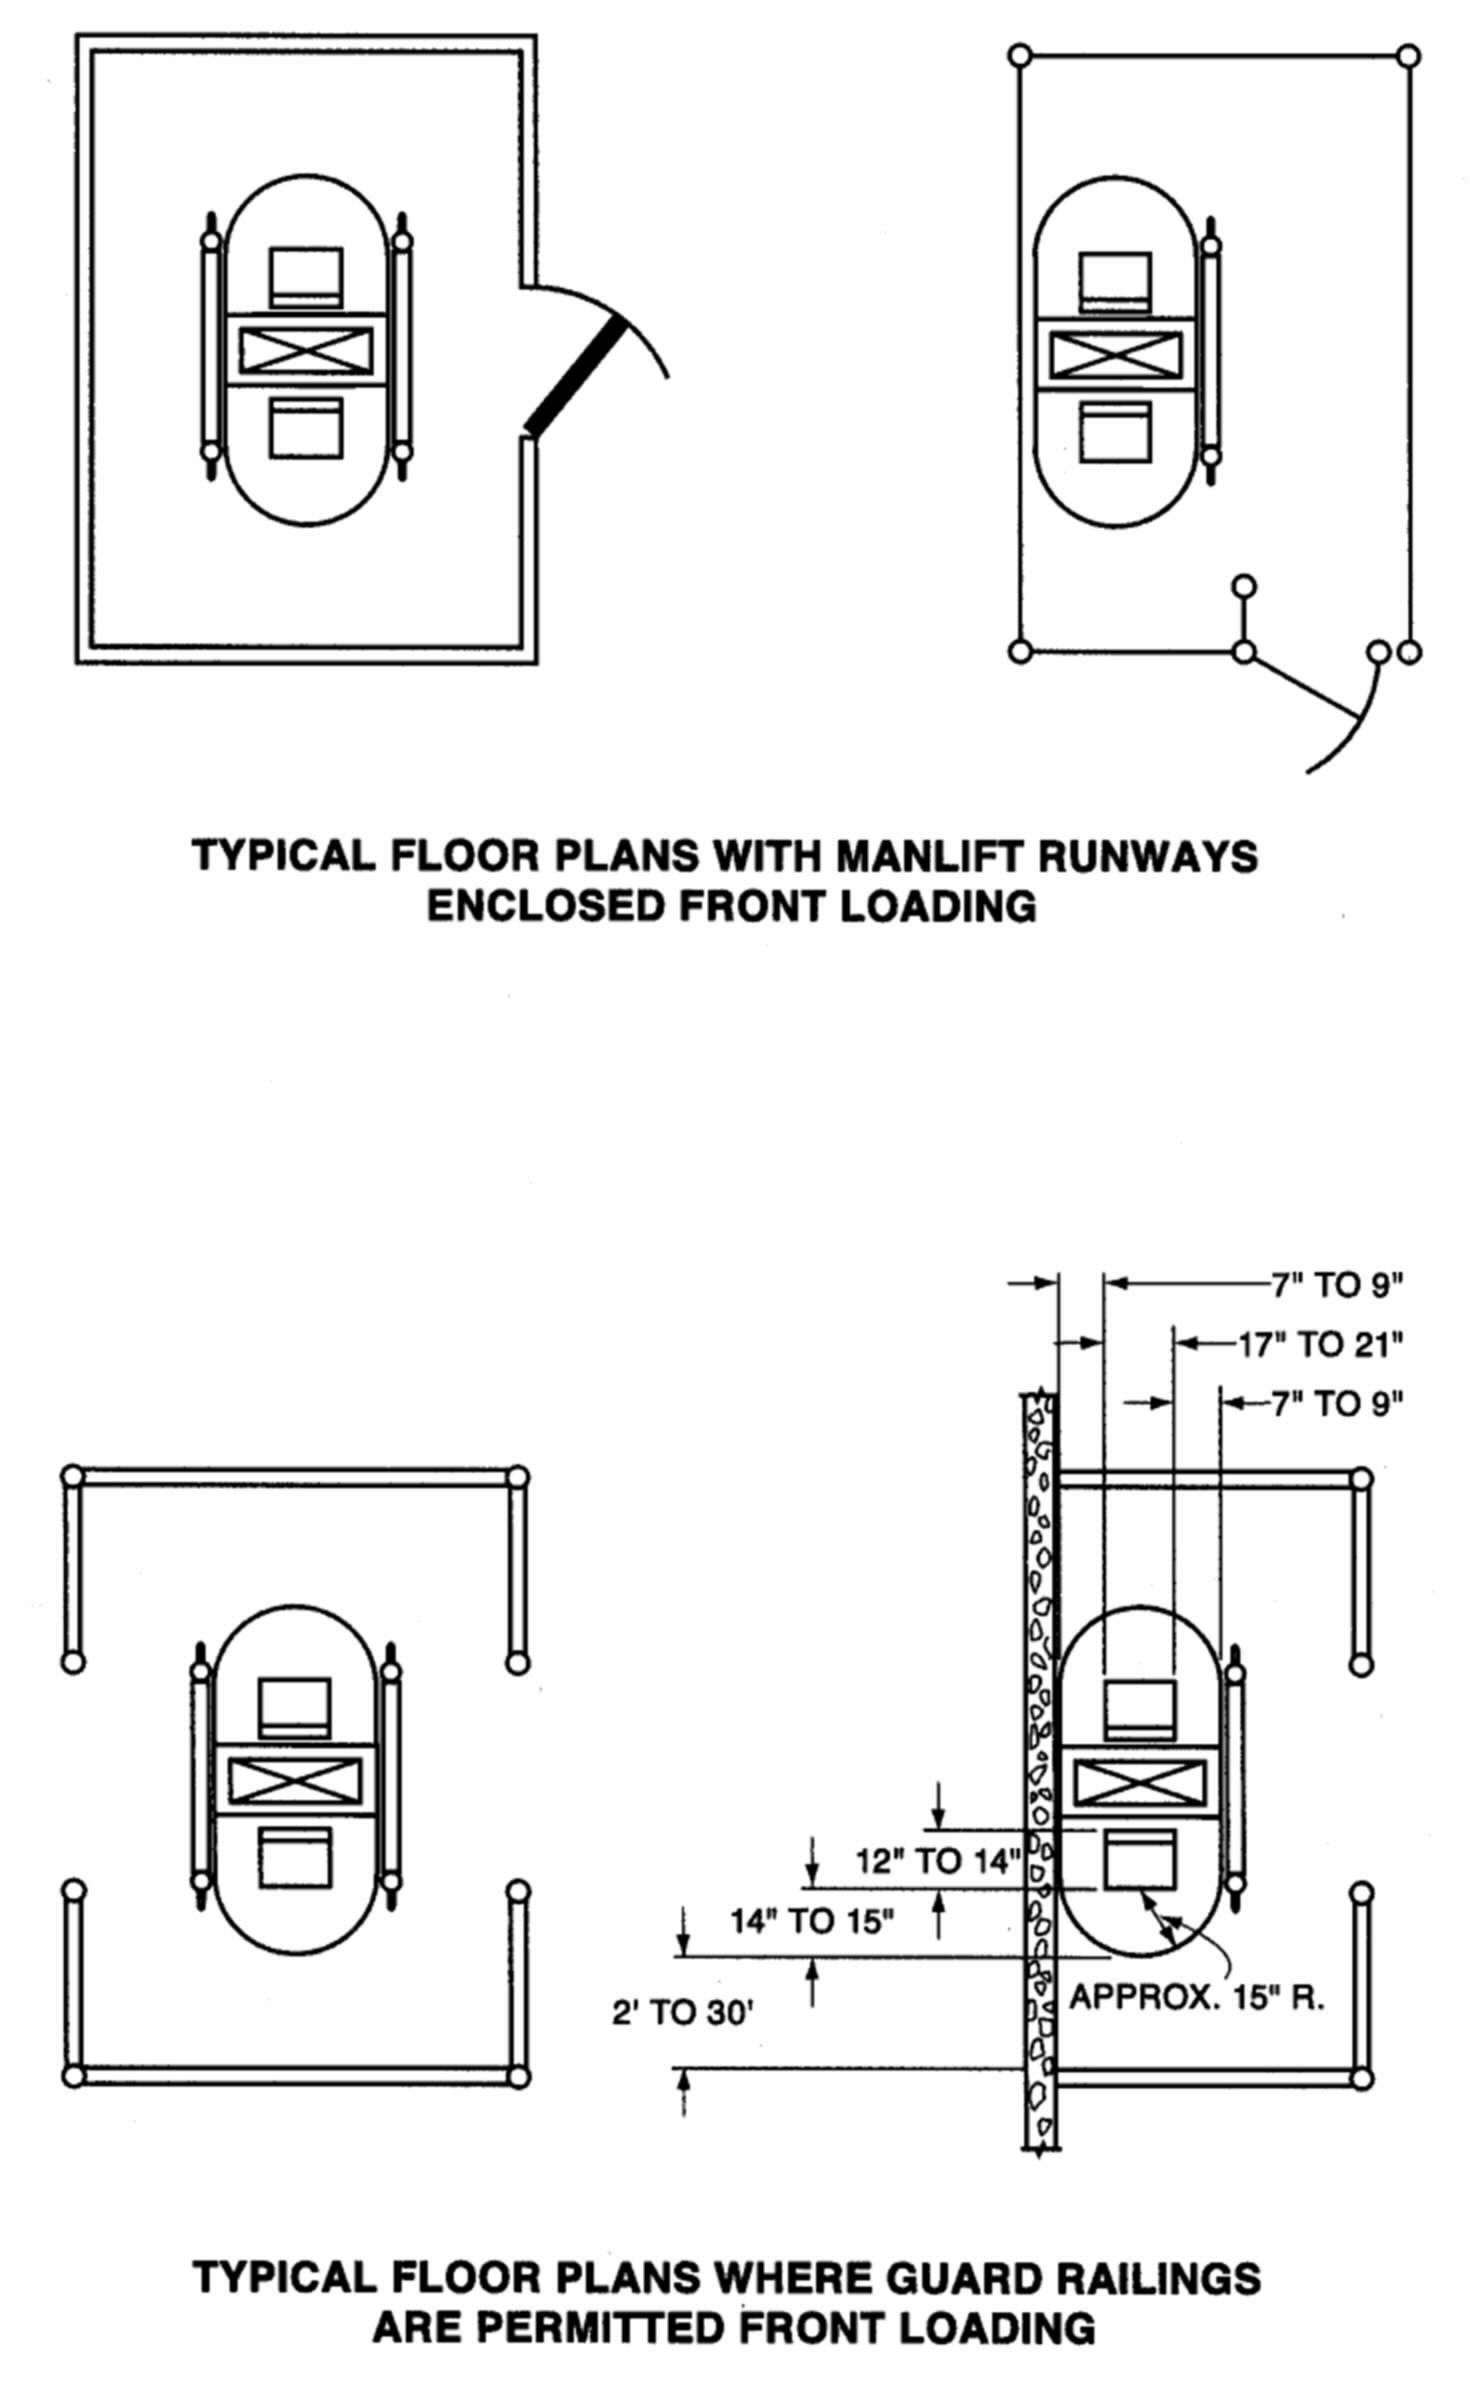 Image 1 within § 3097. Construction Requirements for Manlifts Arranged for Front Loading.